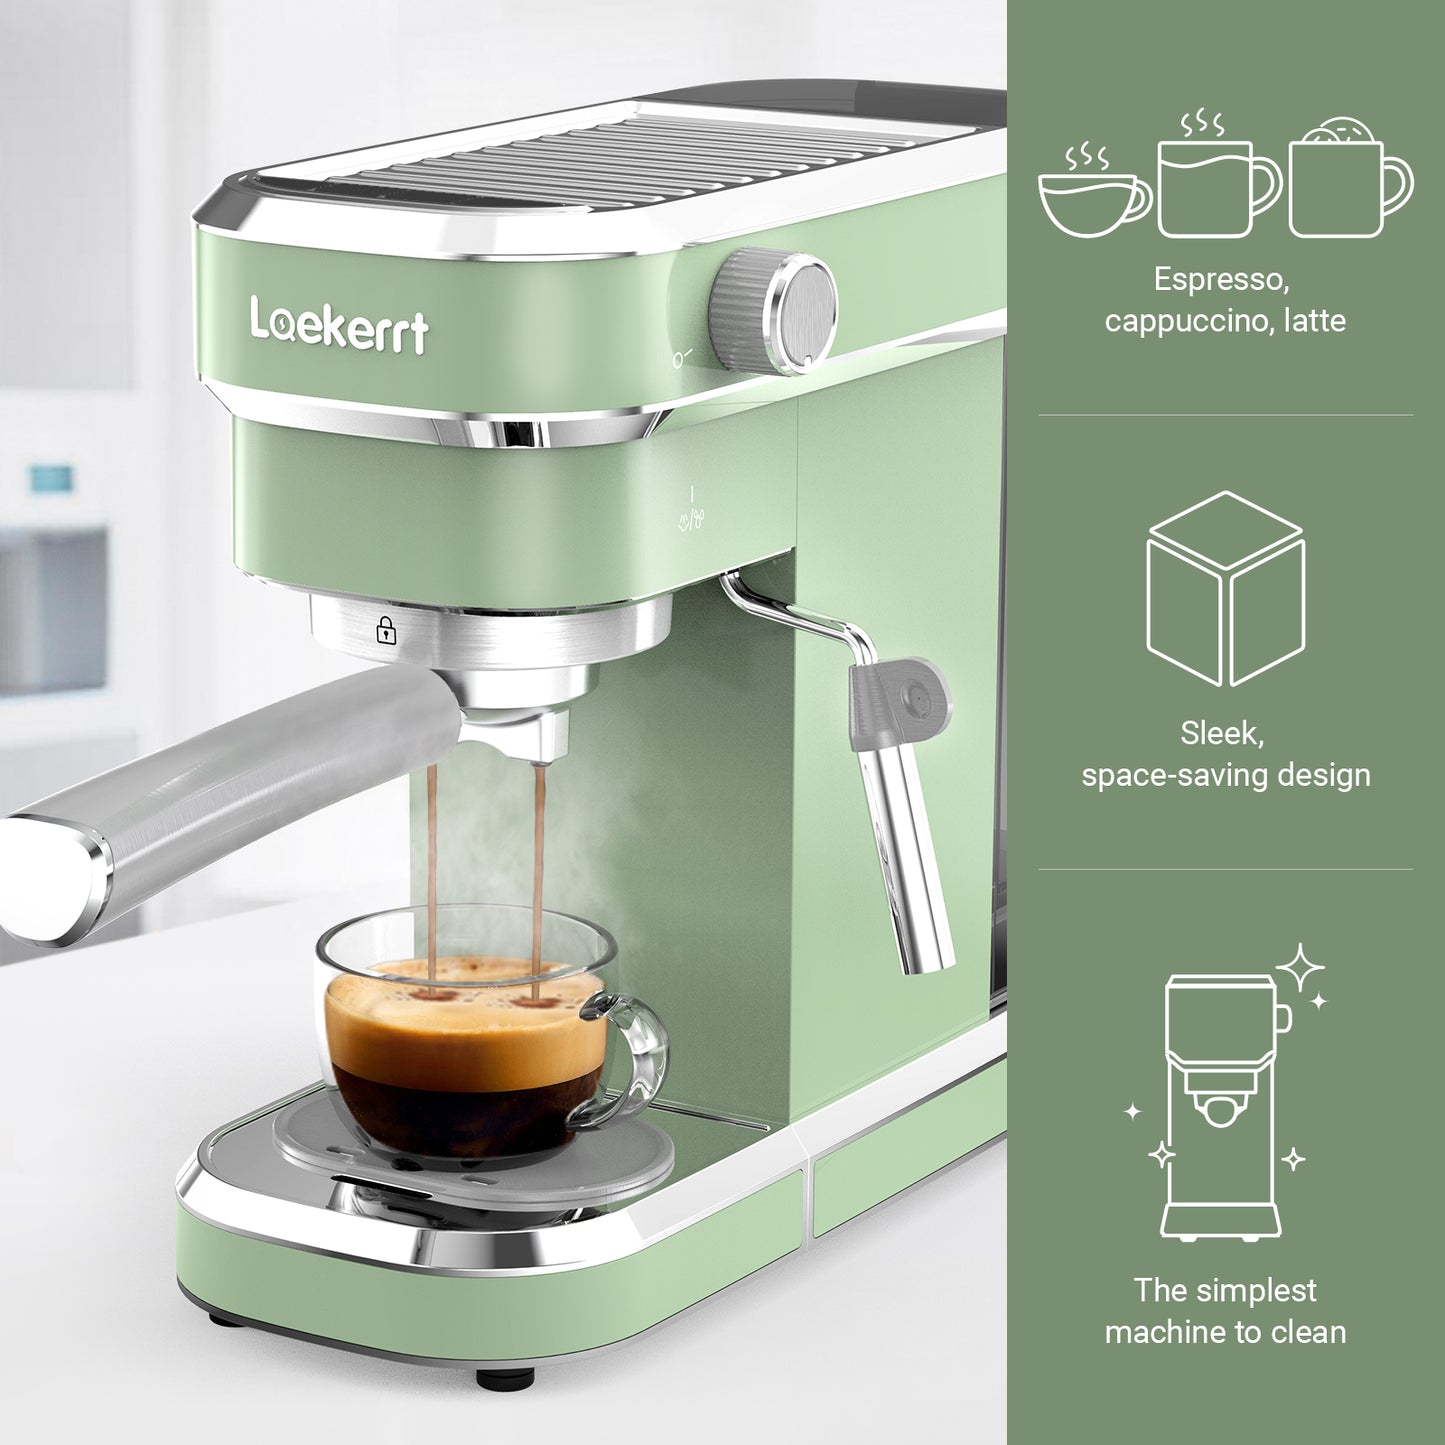 Laekerrt Espresso Machine 20 Bar Espresso Maker CMEP01 with Milk Frother Steam Wand, Retro Home Expresso Coffee Machine for Cappuccino and Latte (Green) Gift for Coffee Lovers, Mom, Friend, Family